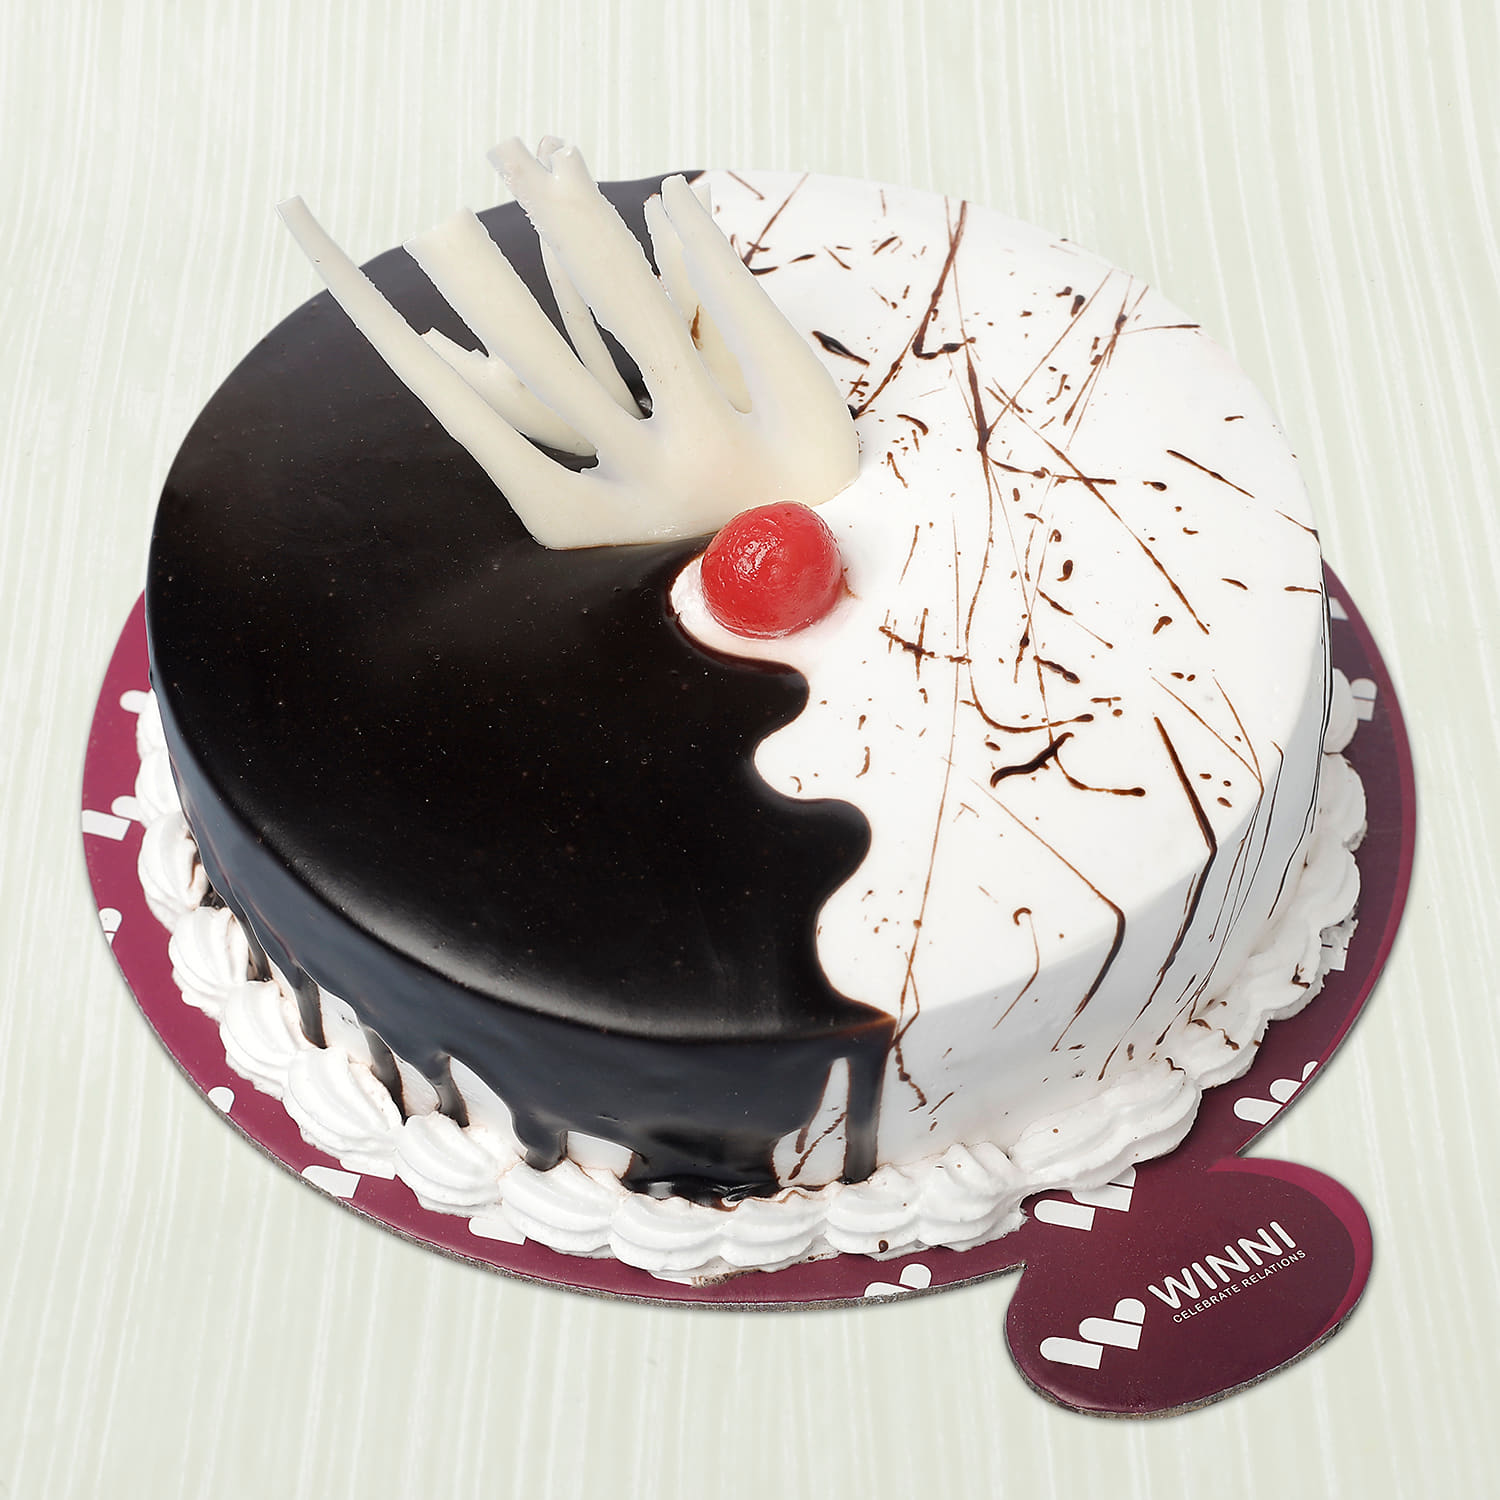 Delicious Cakes for all! - Online Cakes & Flowers Delivery in India - Winni